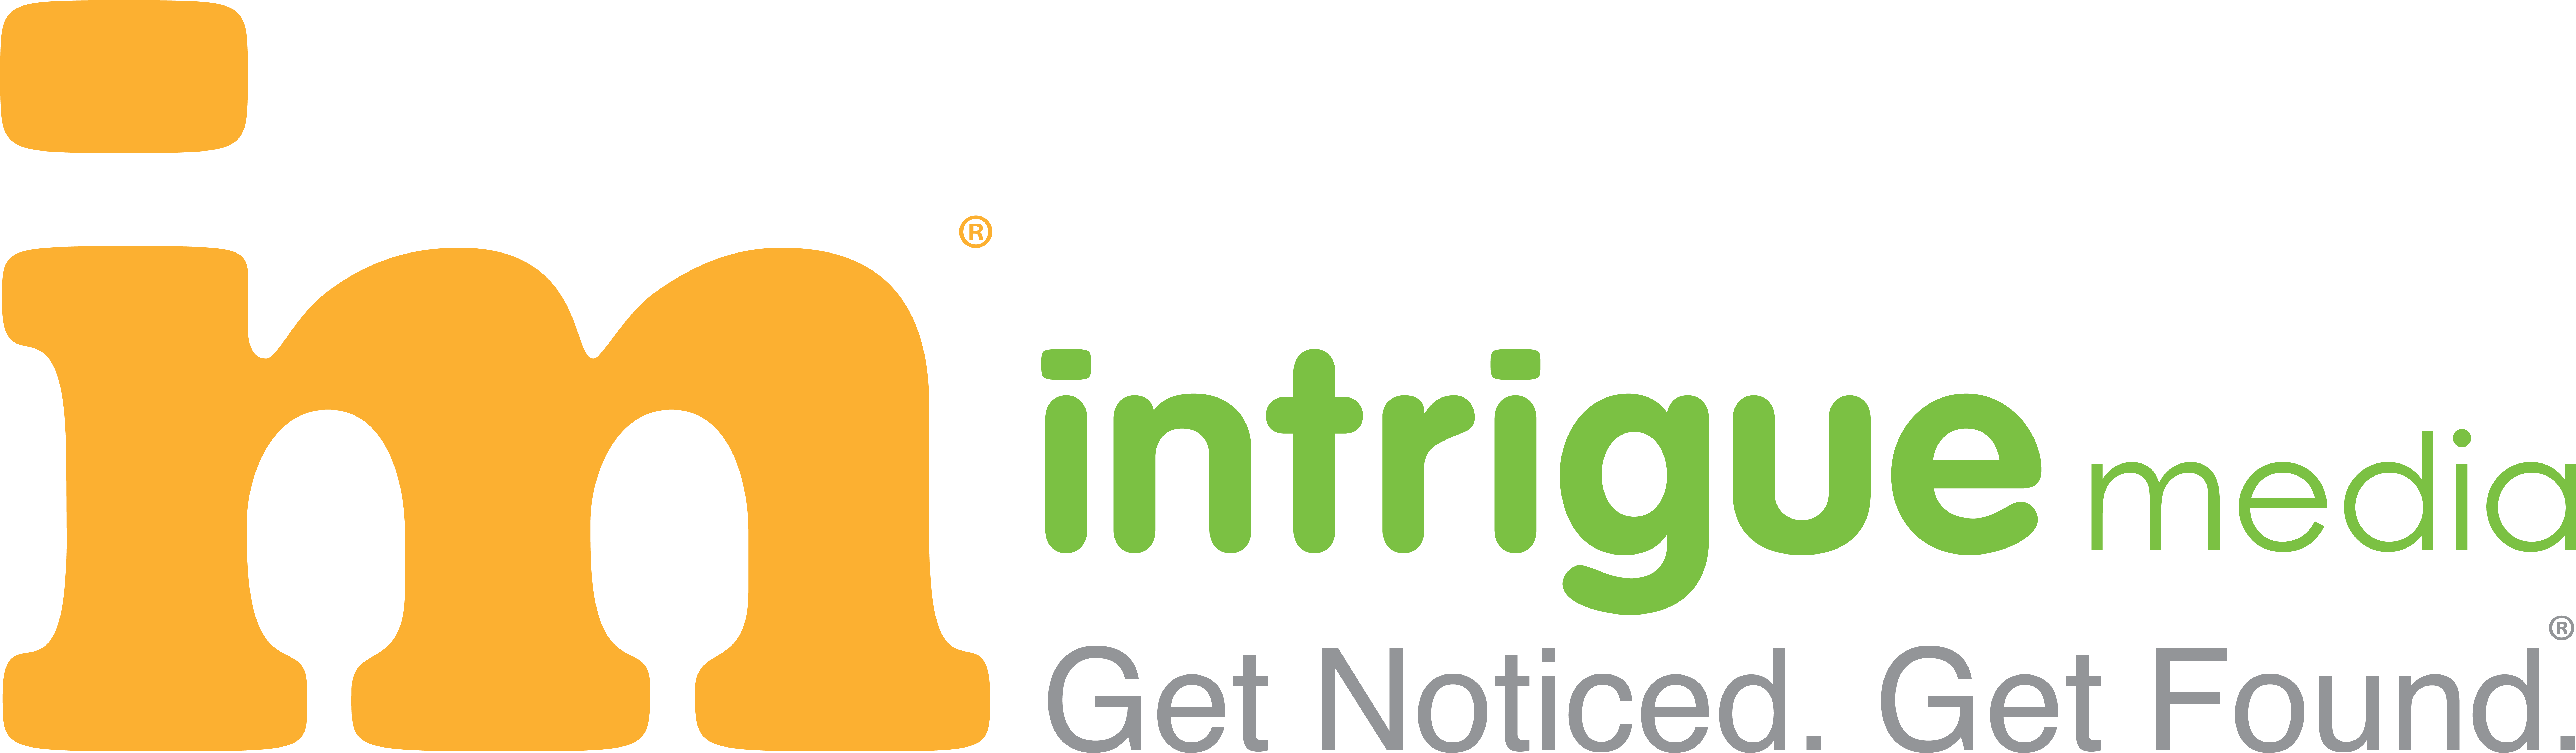 Media Partners Have Been Instrumental In Generating - Intrigue Media Logo (9917x3140)